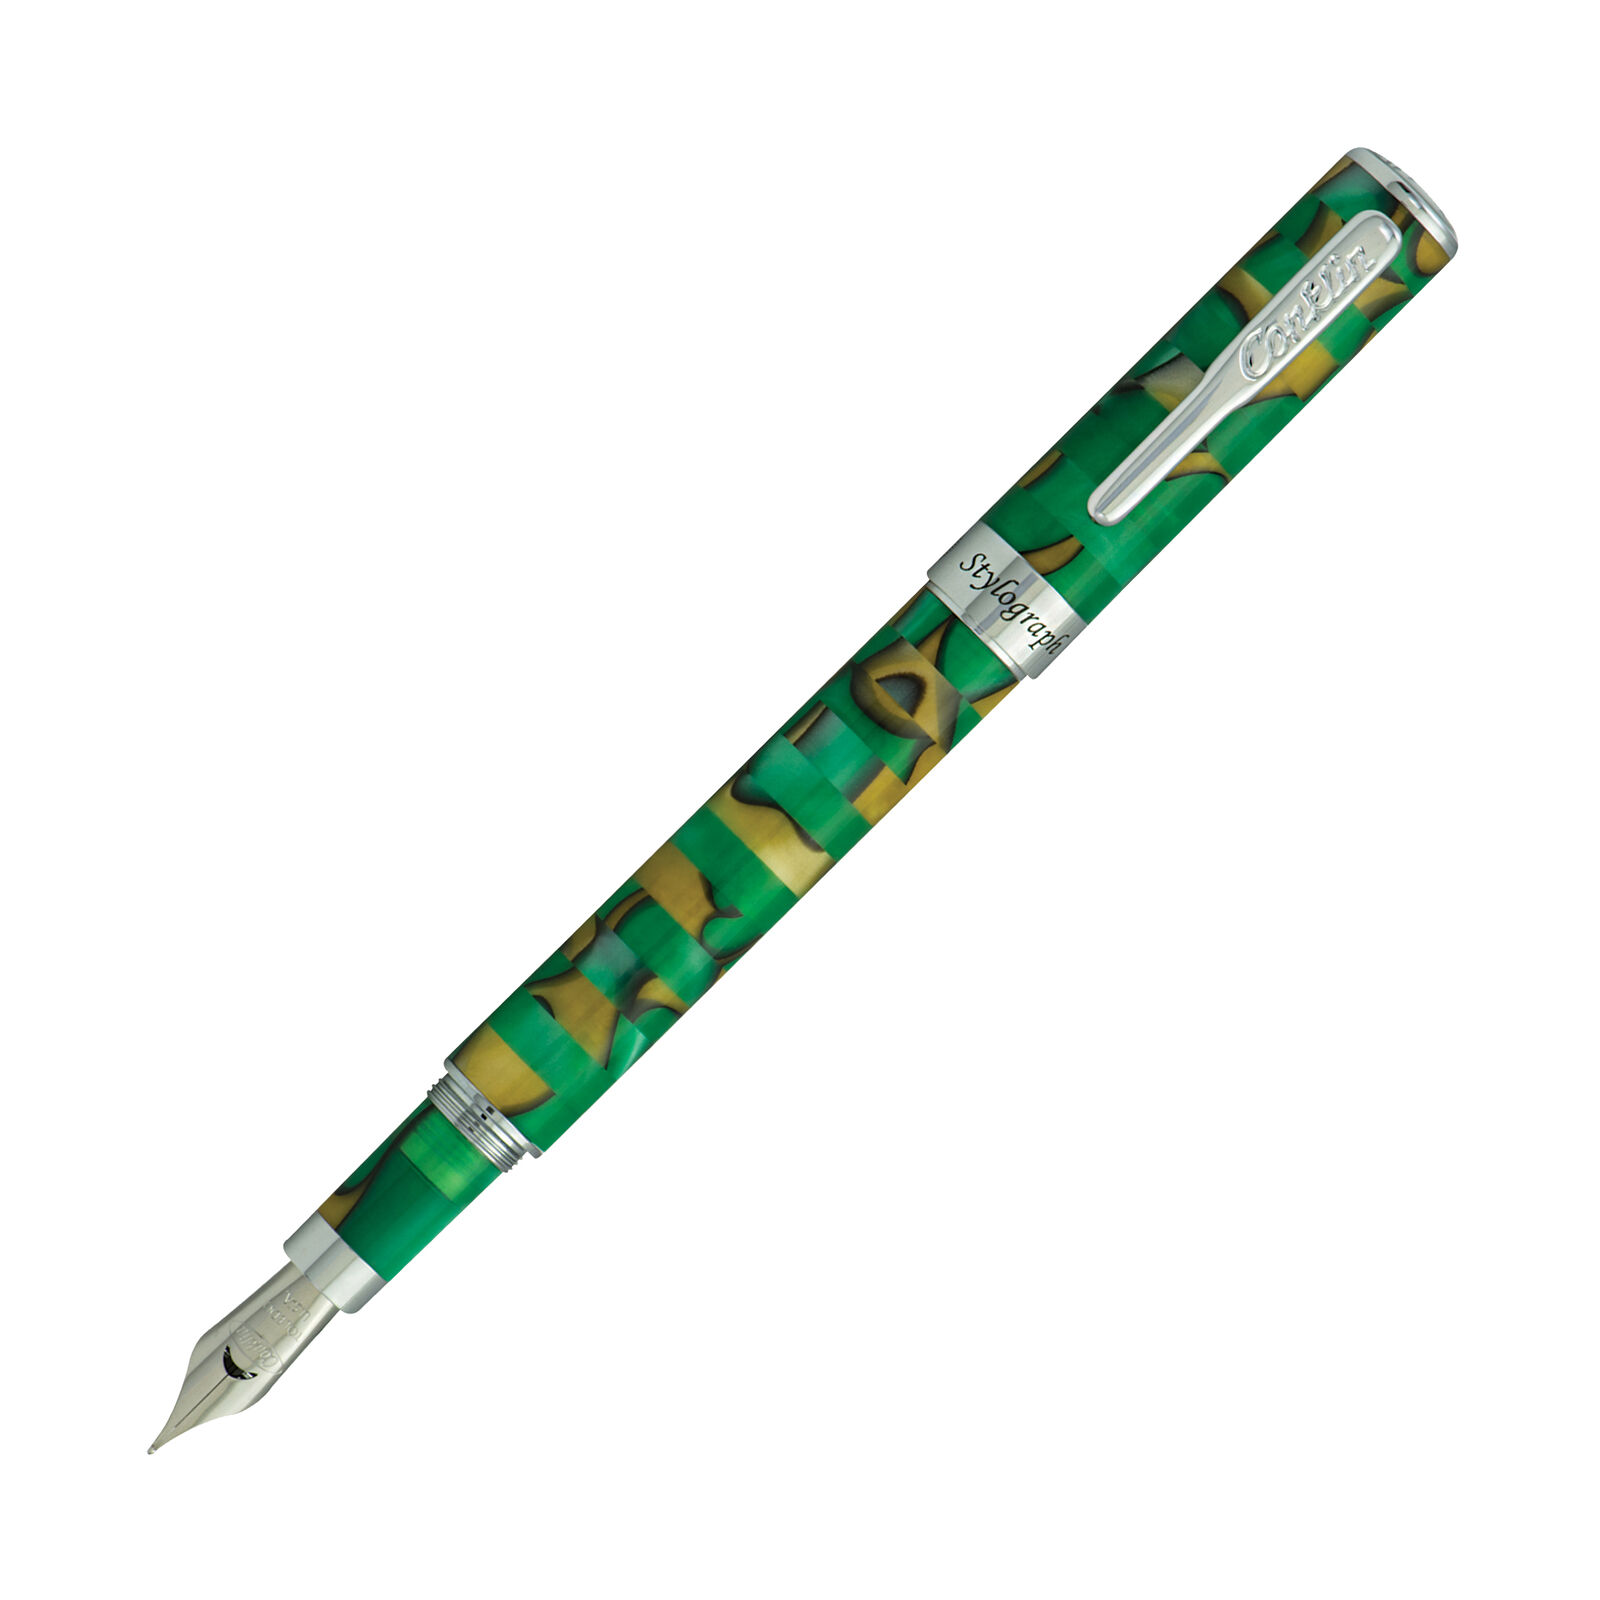 Conklin Stylograph Mosaic Fountain Pen in Green/Brown - Medium Point - NEW